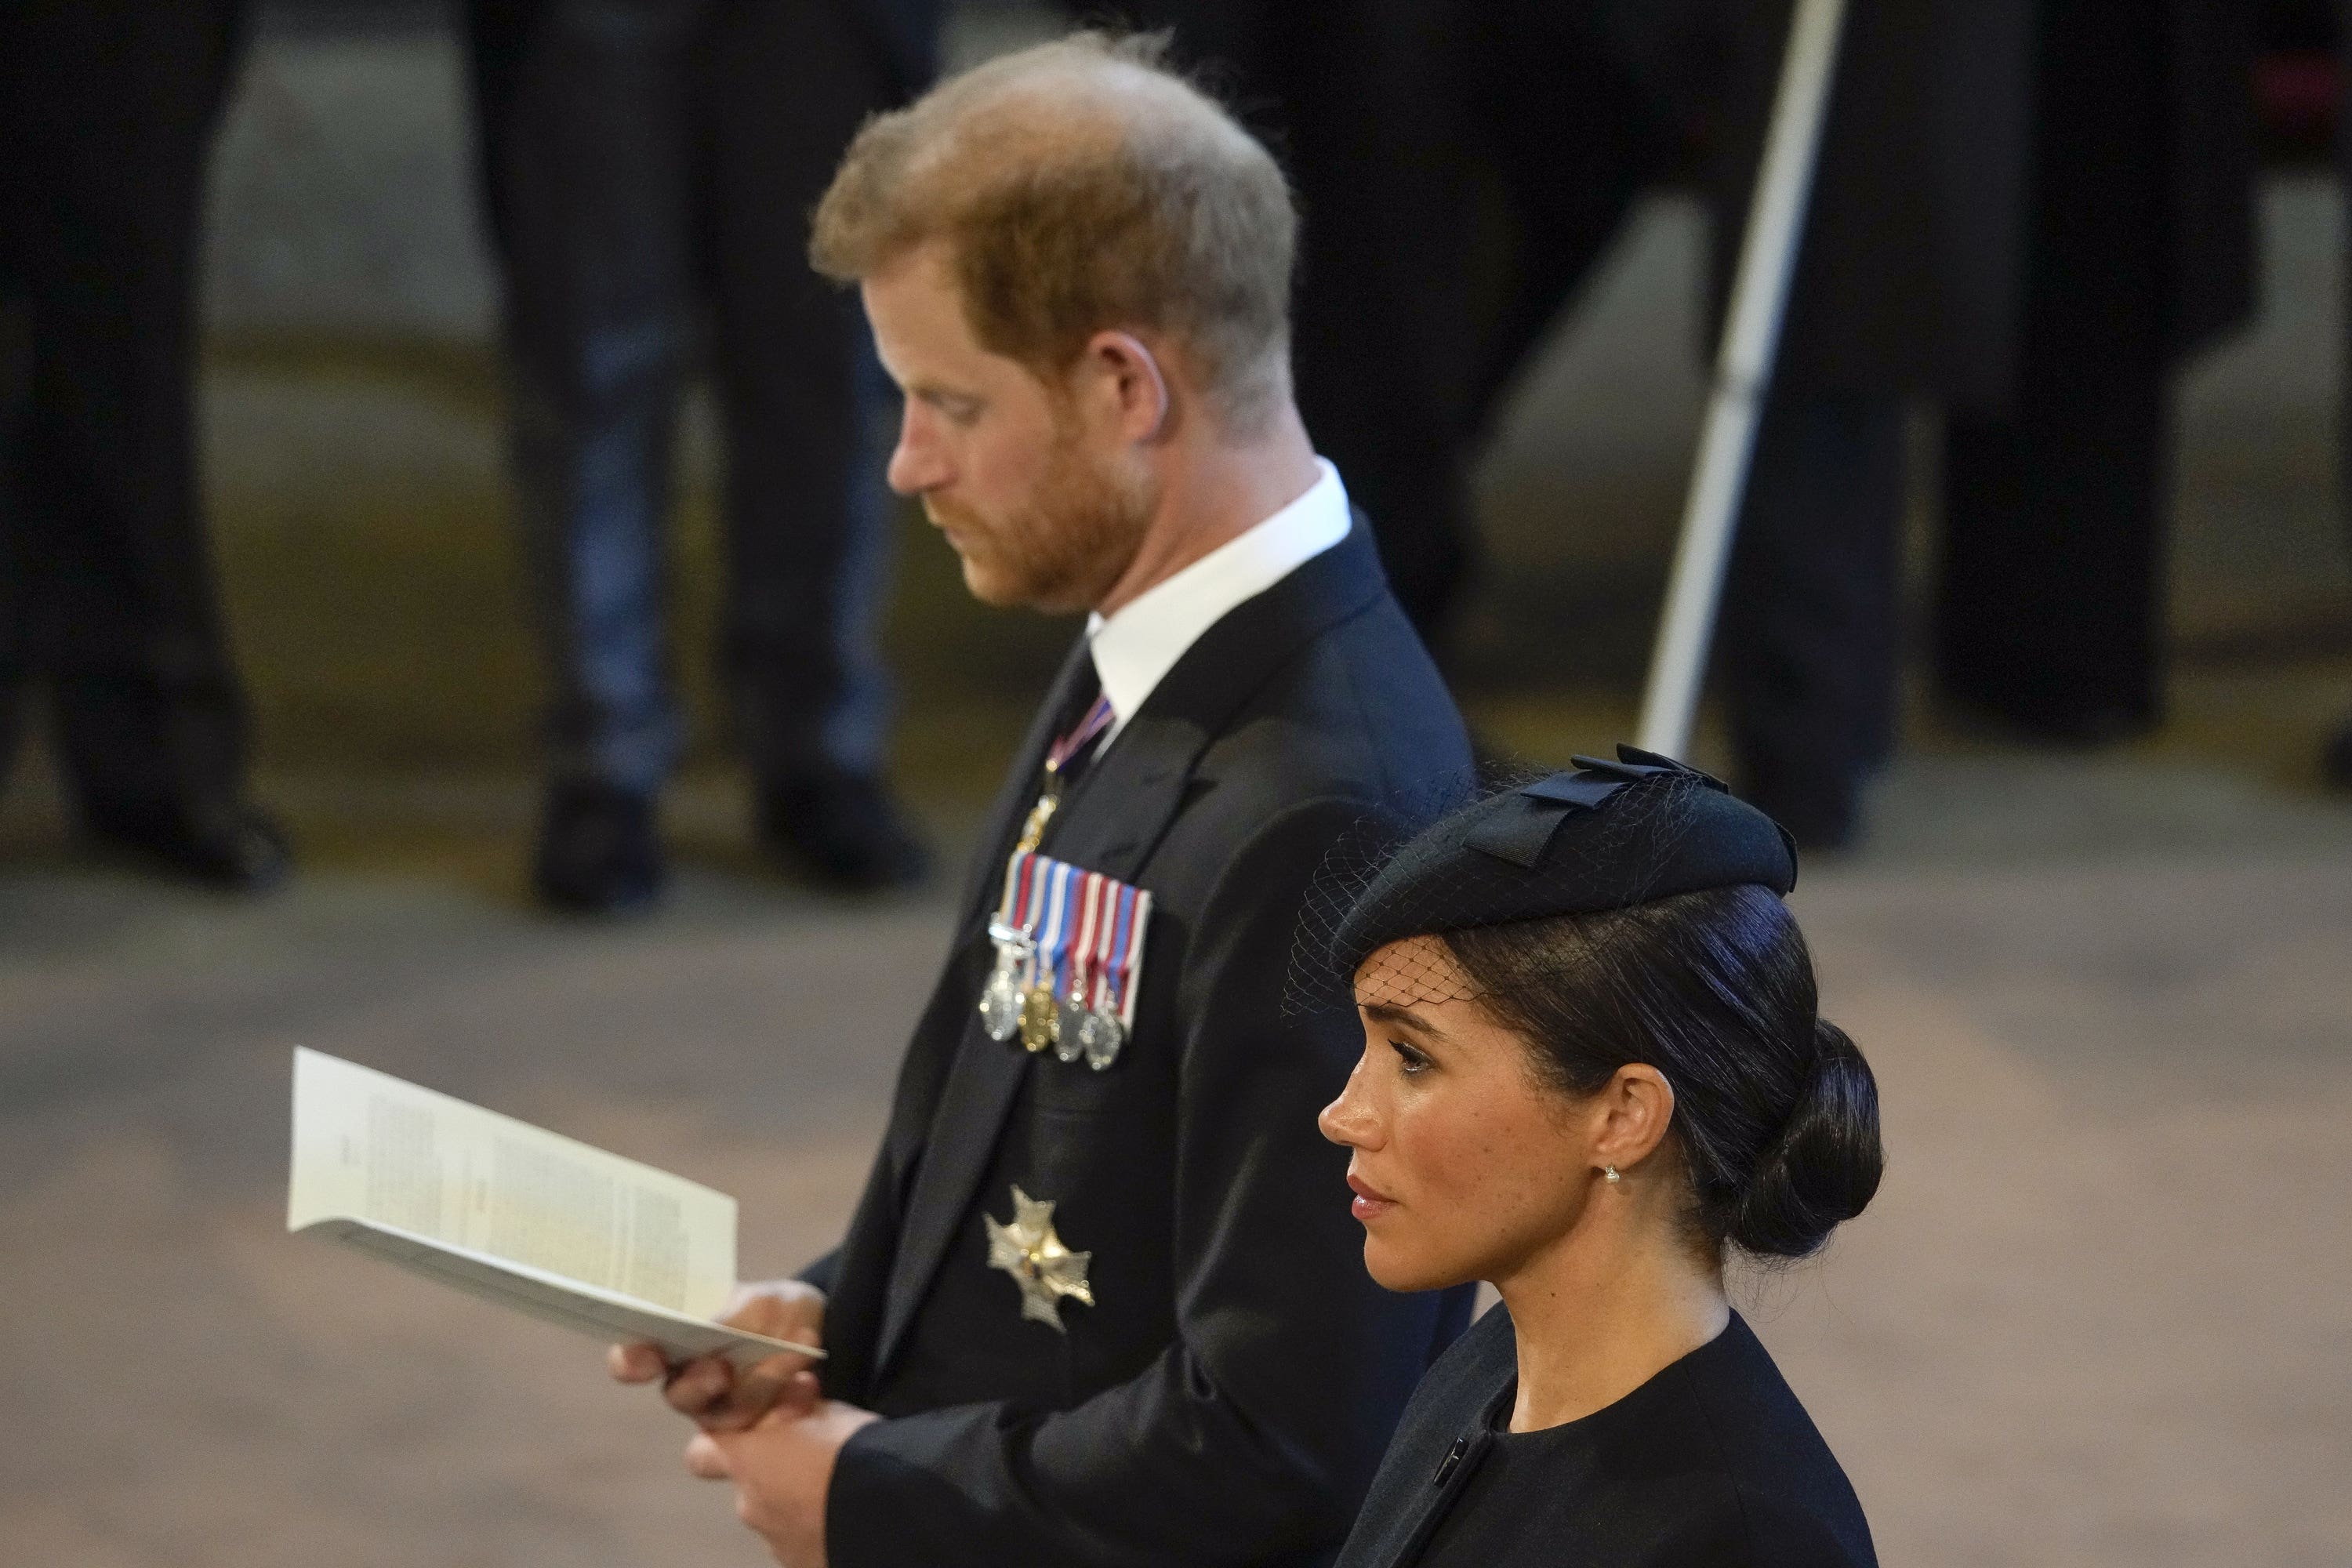 The Duke and Duchess of Sussex during a service in Westminster Hall for the Queen.